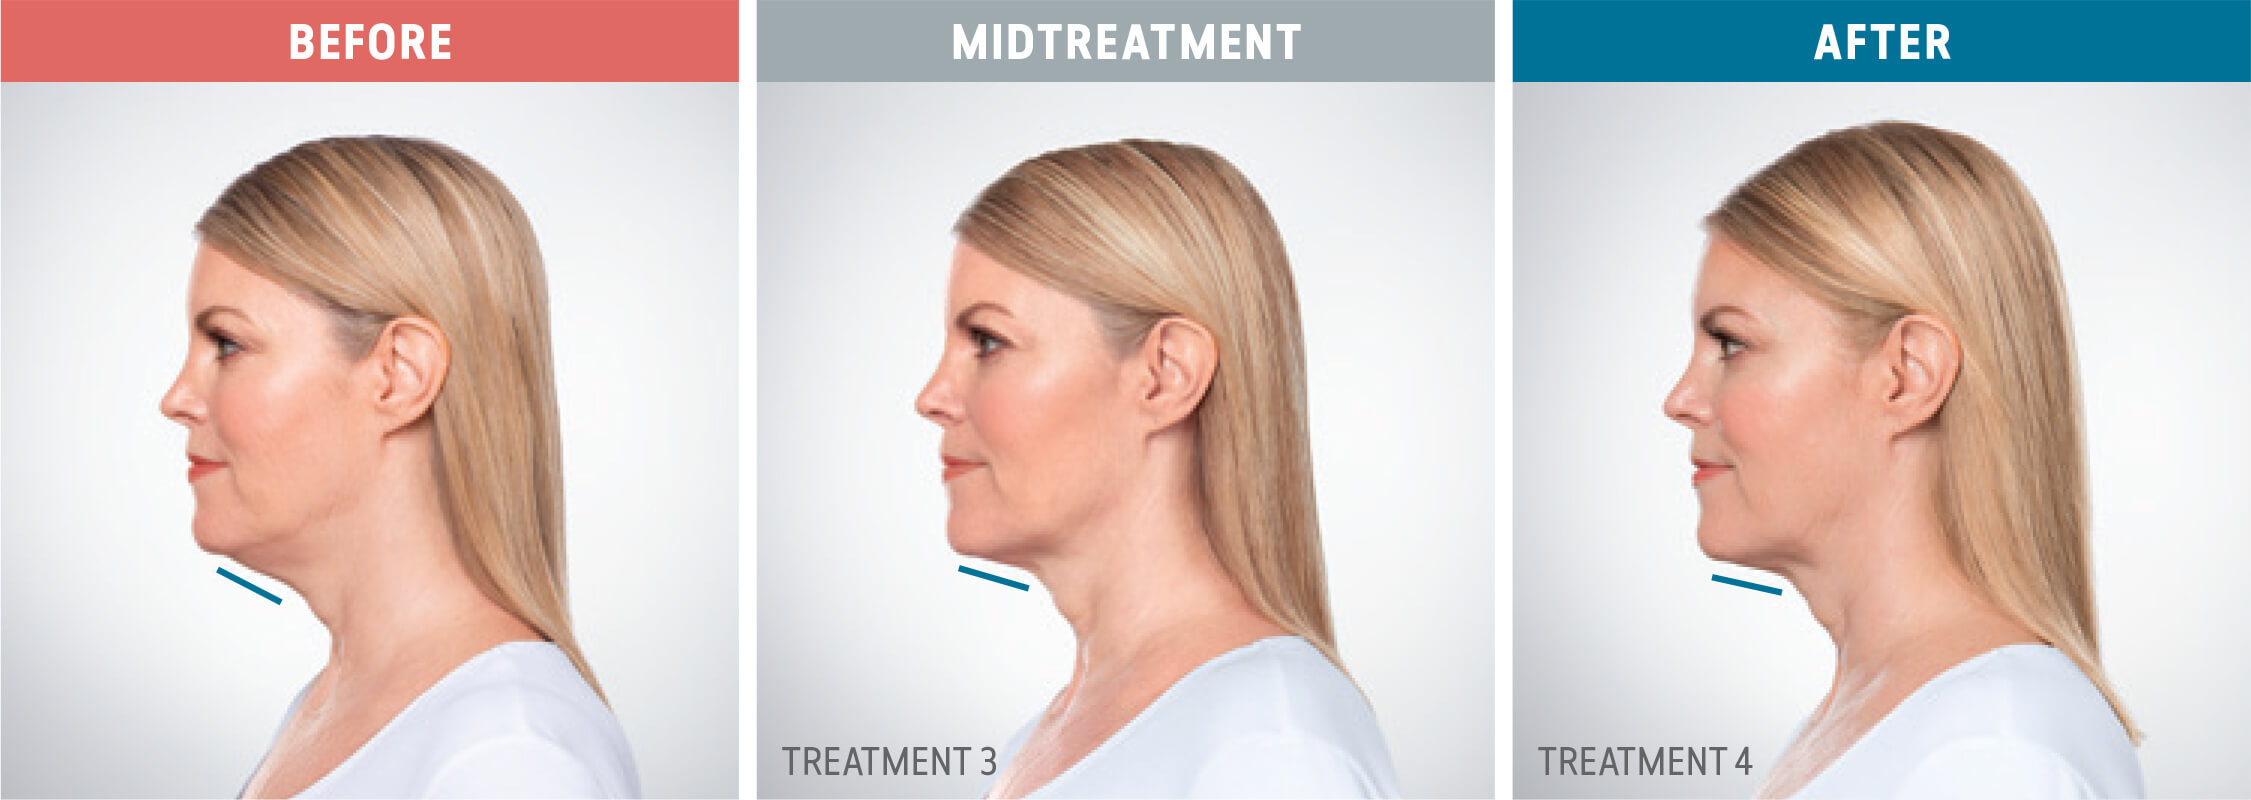 kybella-before-and-after